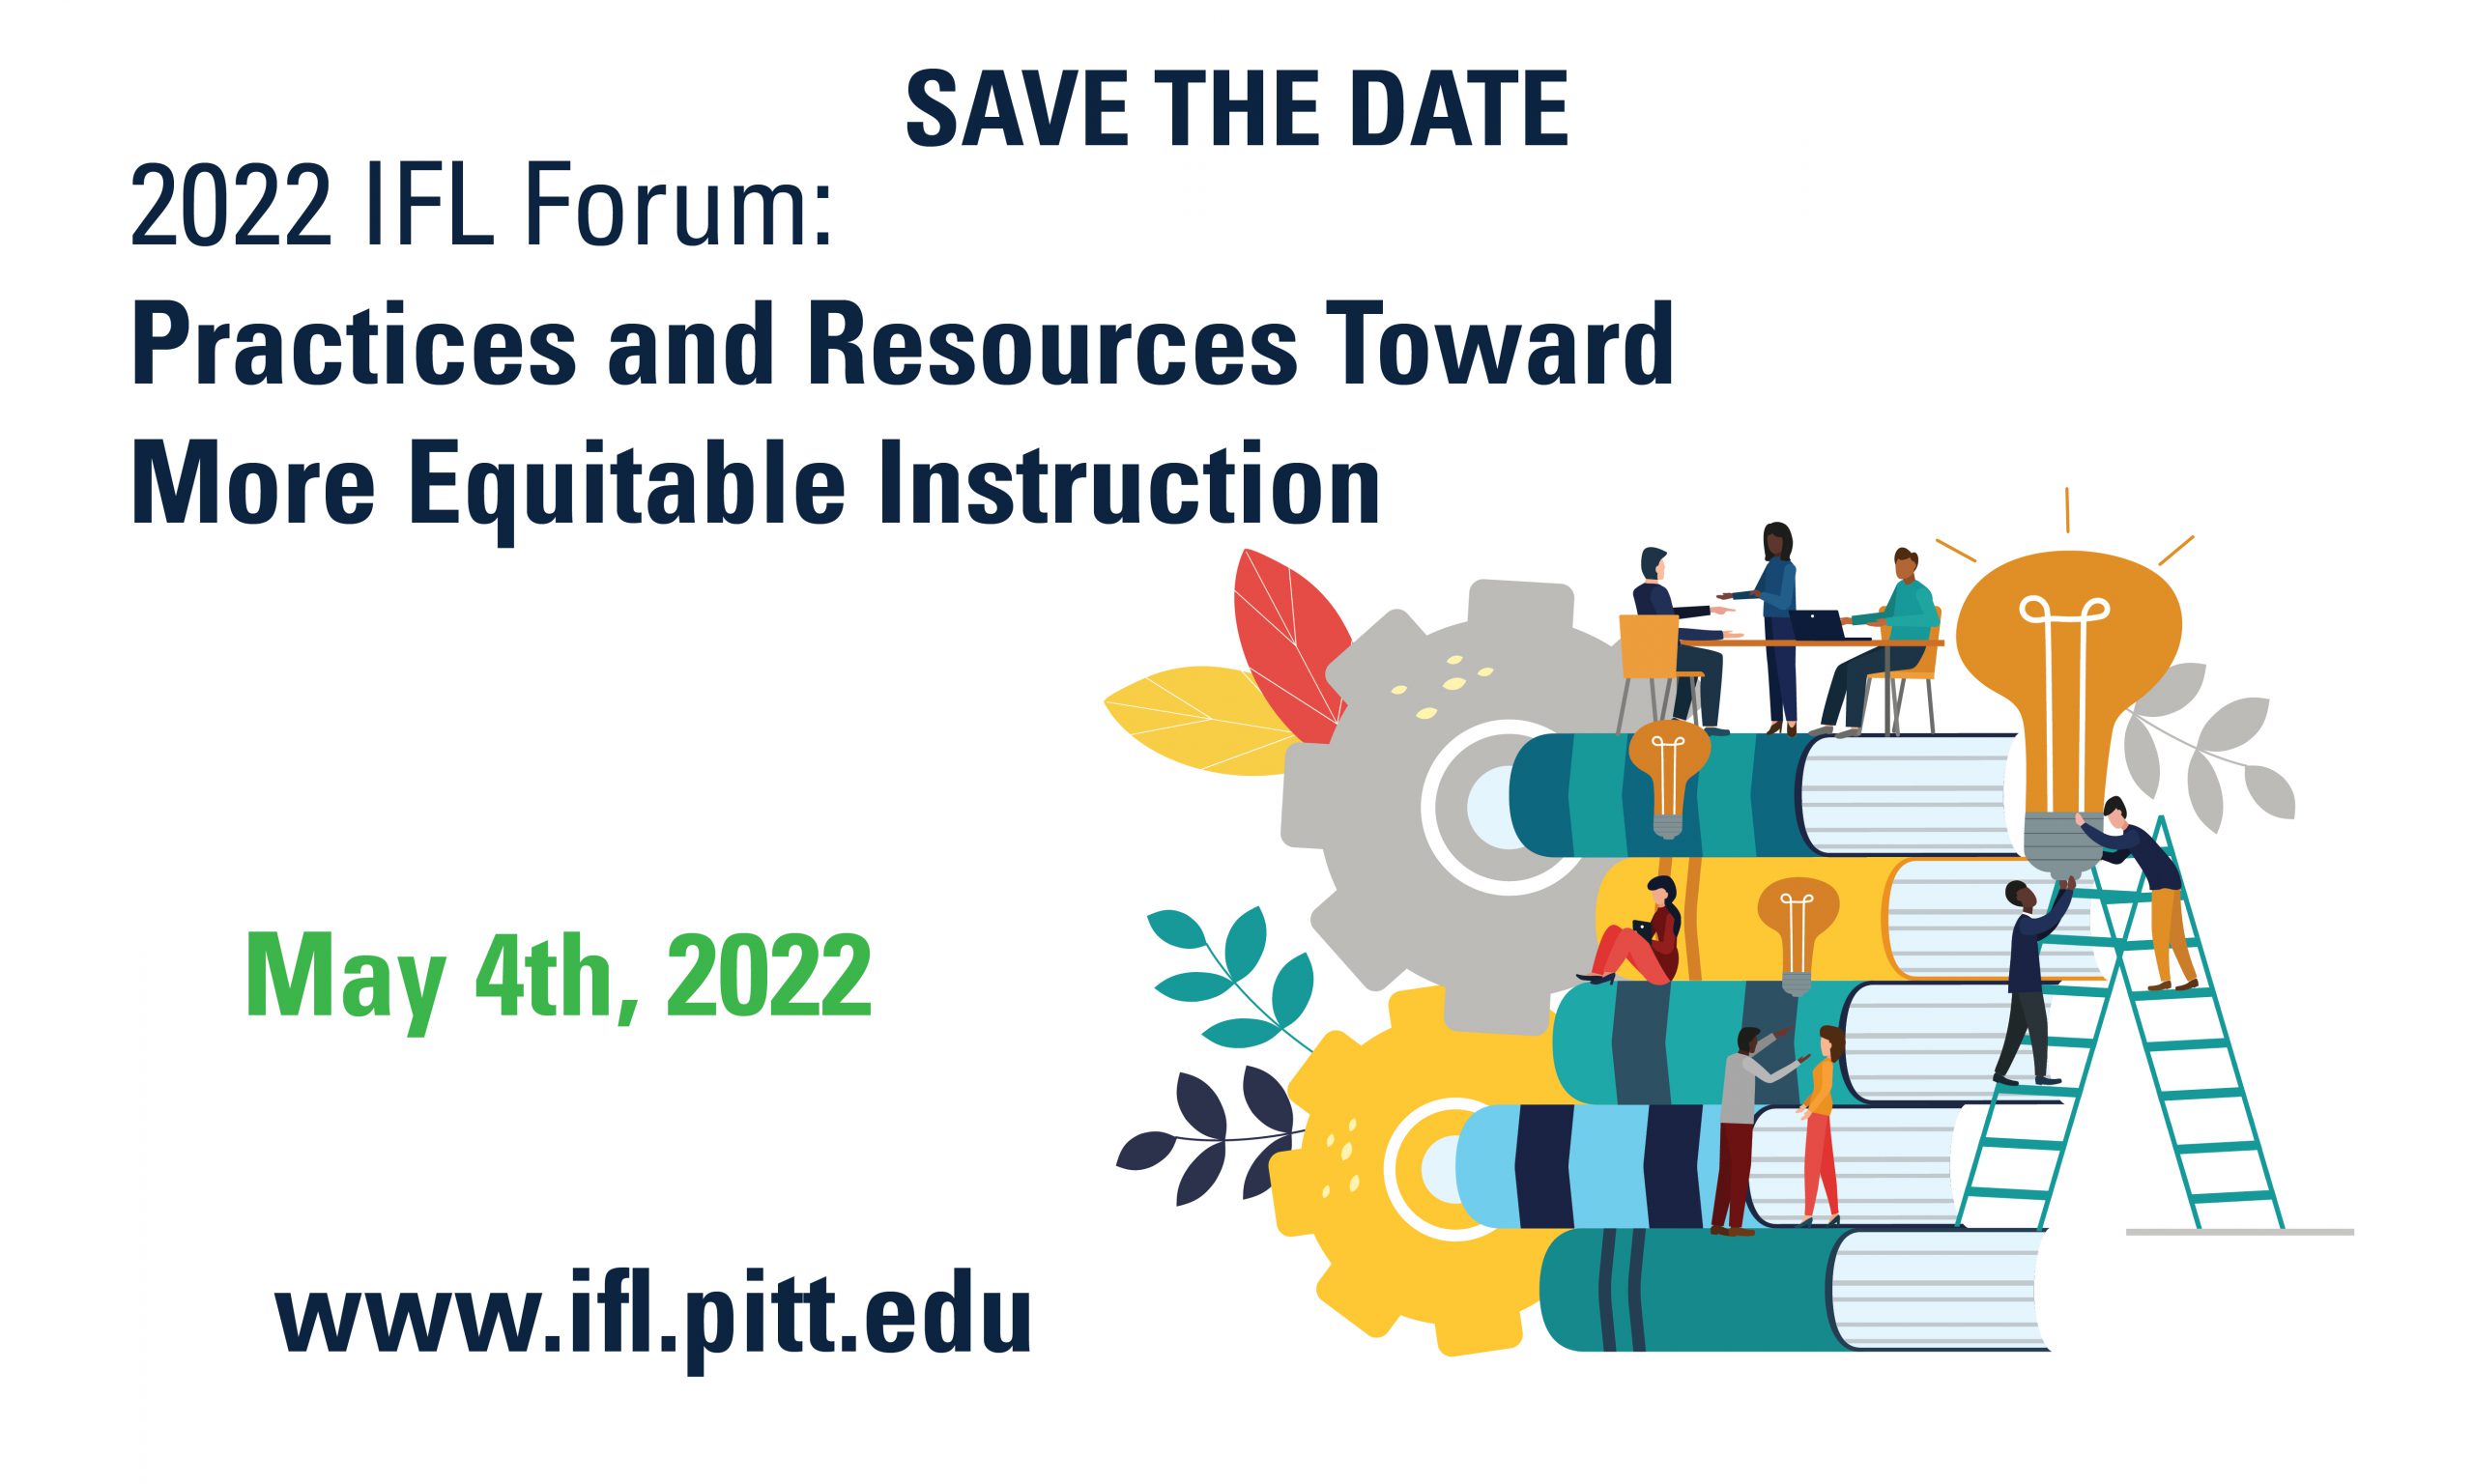 IFL Forum 2022: Practices andResources Toward More Equitable Instruction - May 4th, 2022. Register at www.iflforum.com